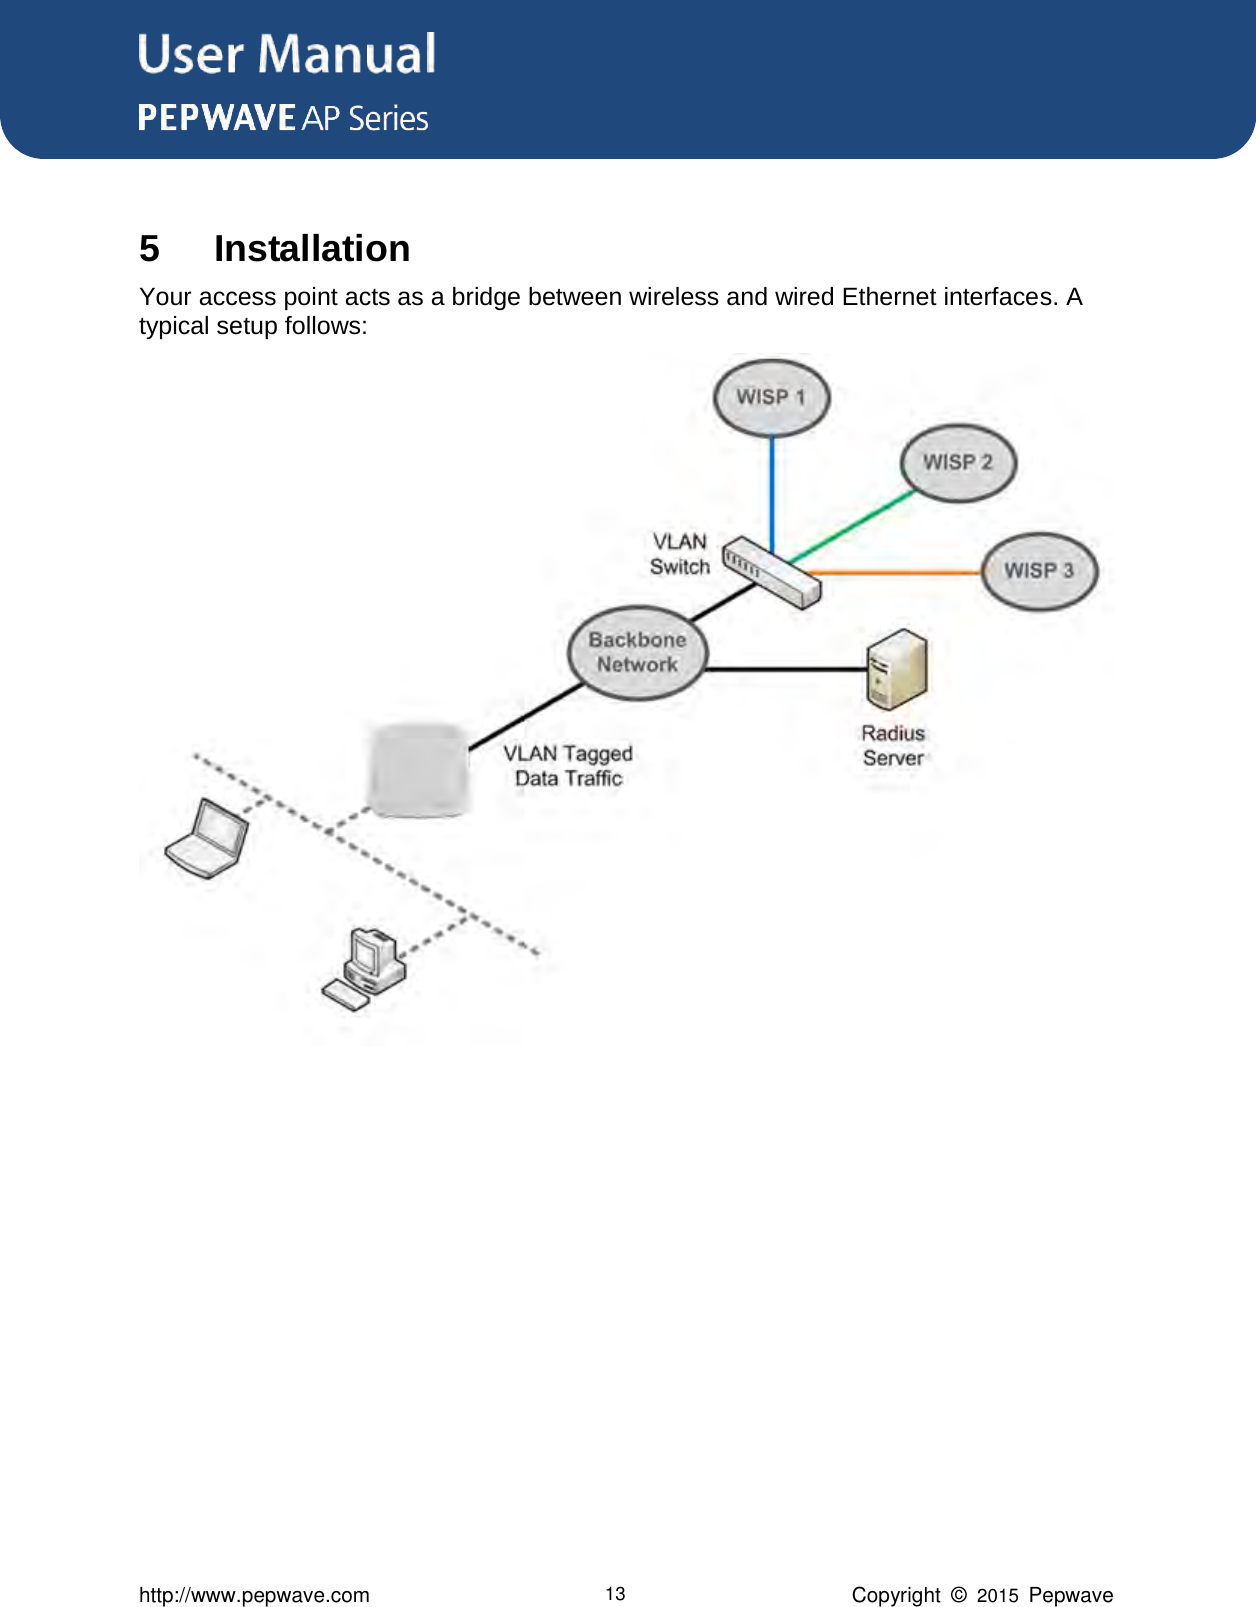 User Manual      http://www.pepwave.com 13 Copyright  ©  2015  Pepwave  5 Installation Your access point acts as a bridge between wireless and wired Ethernet interfaces. A typical setup follows:             